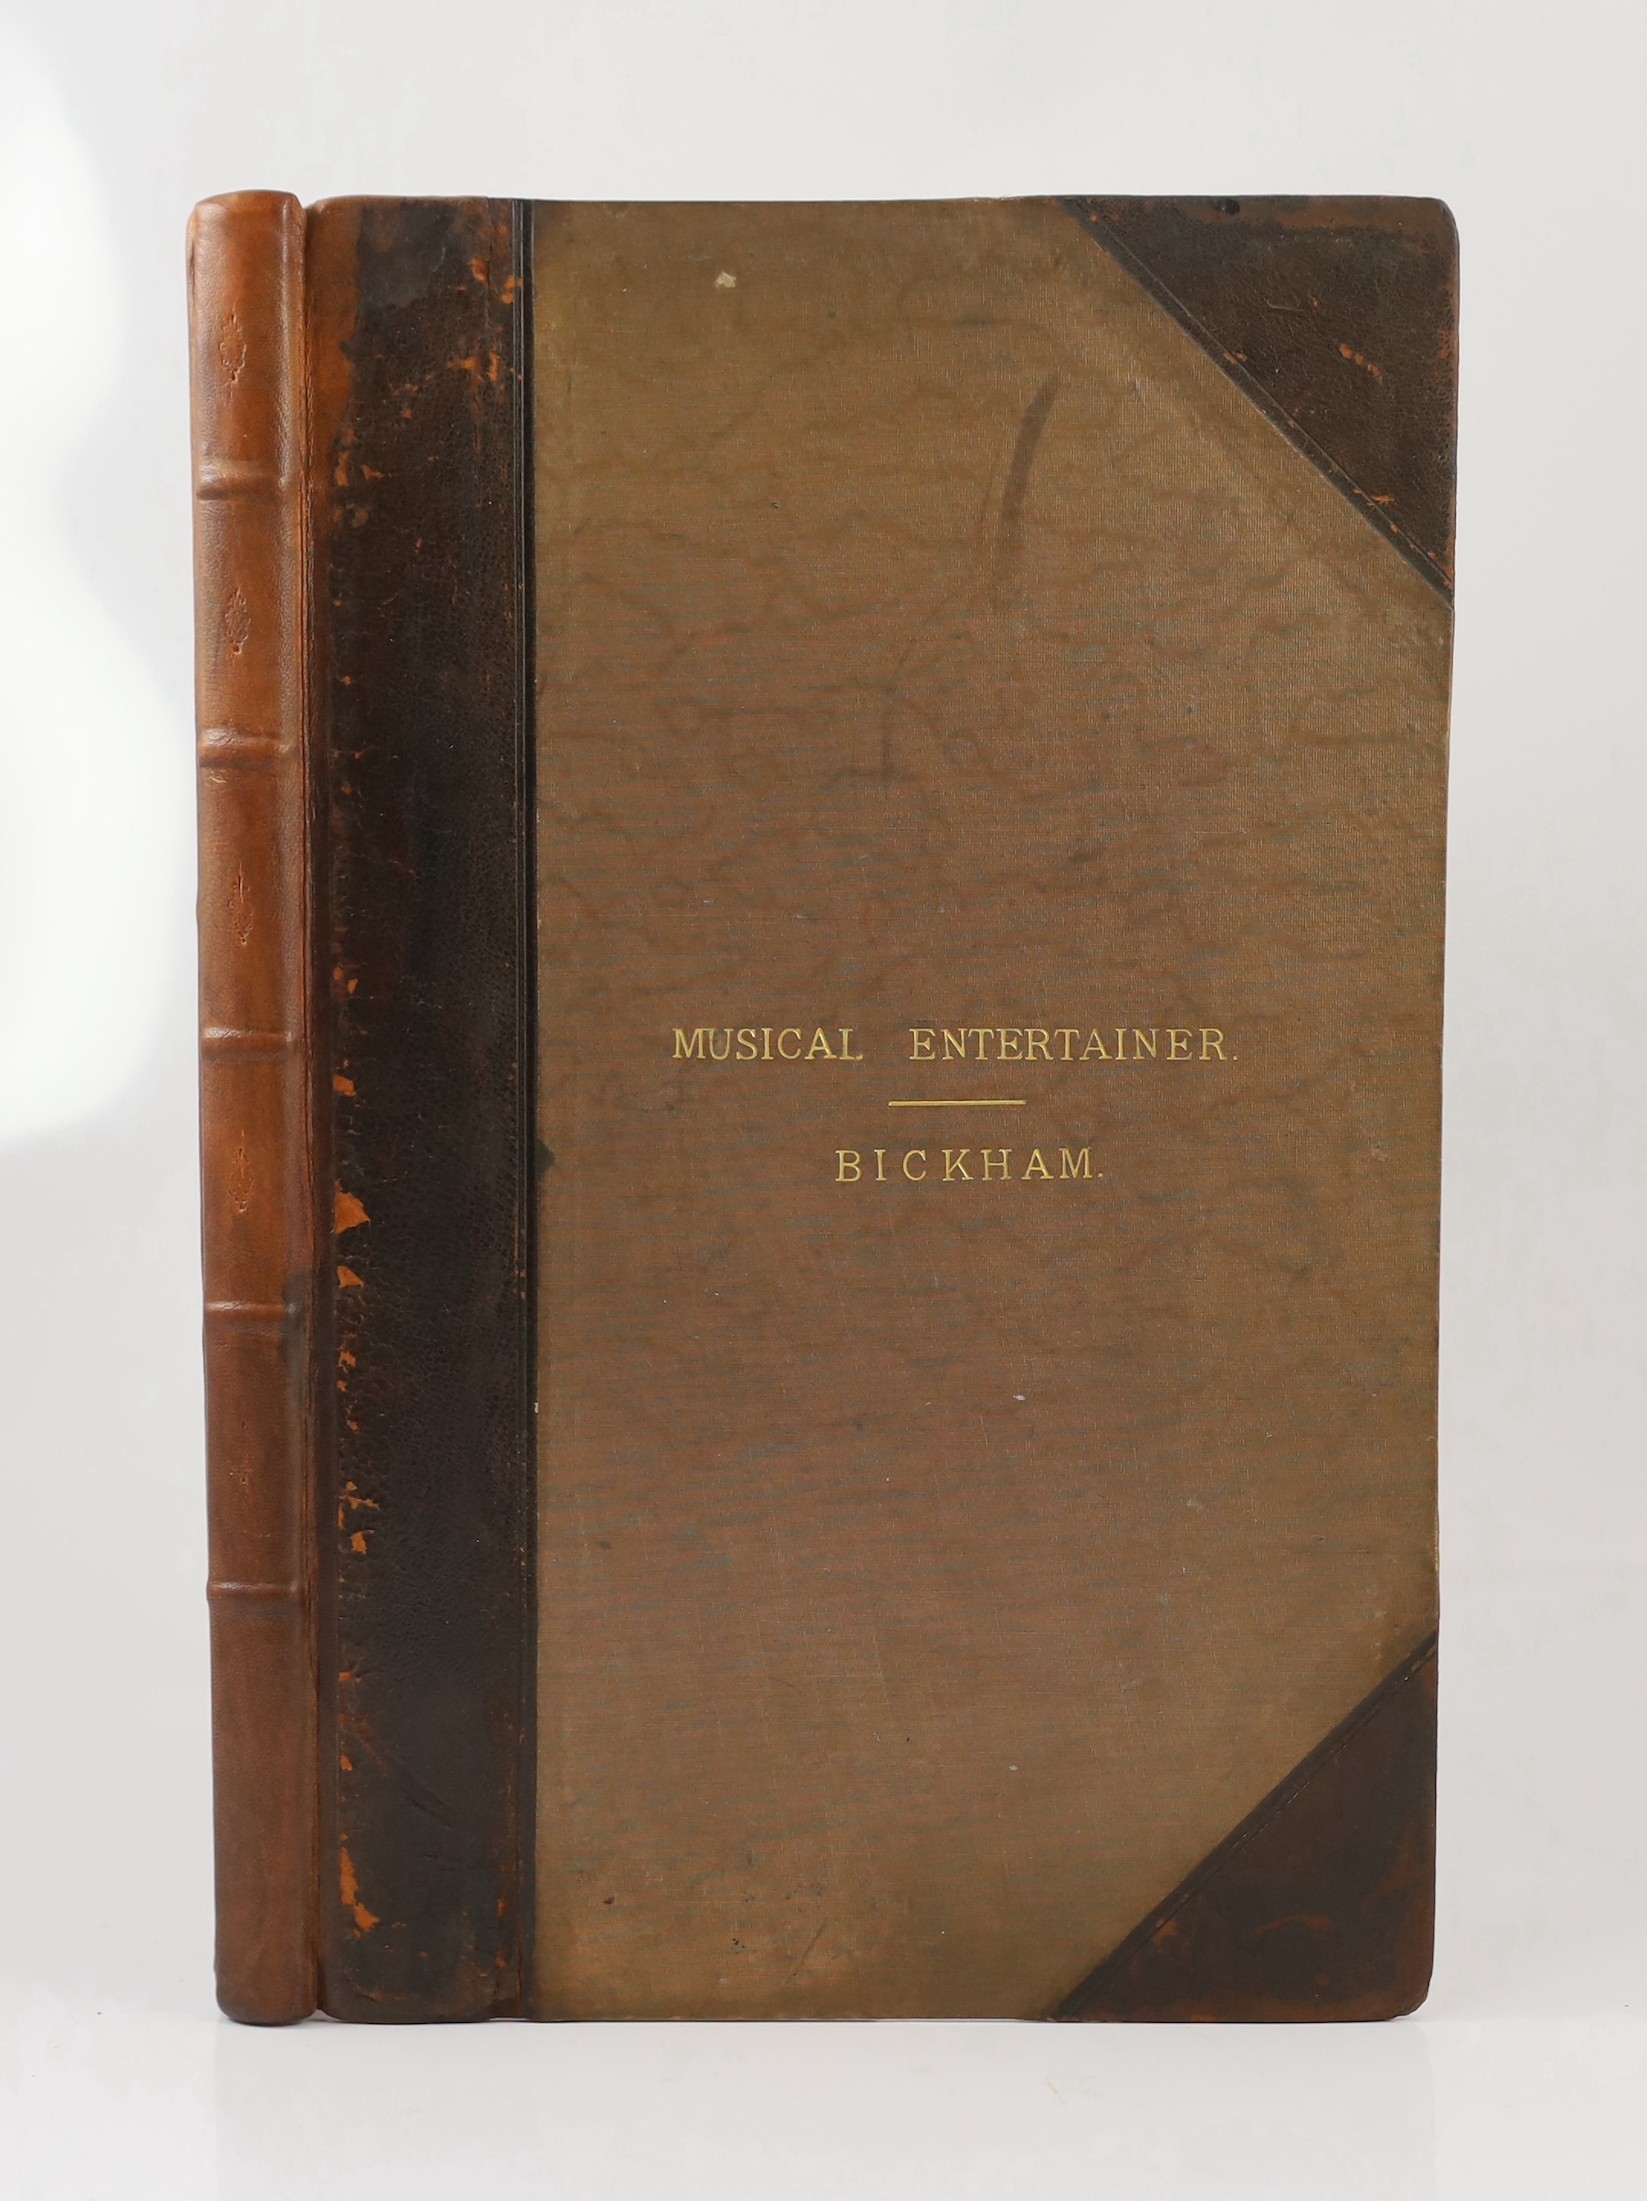 (Bickham, George - The Musical Entertainer). vol. 1 (only, of 2), without title and prelims. 99 (ex.100) engraved leaves of songs (words and music) with pictorial and decorative vignette at head of each; rebound 19th cen